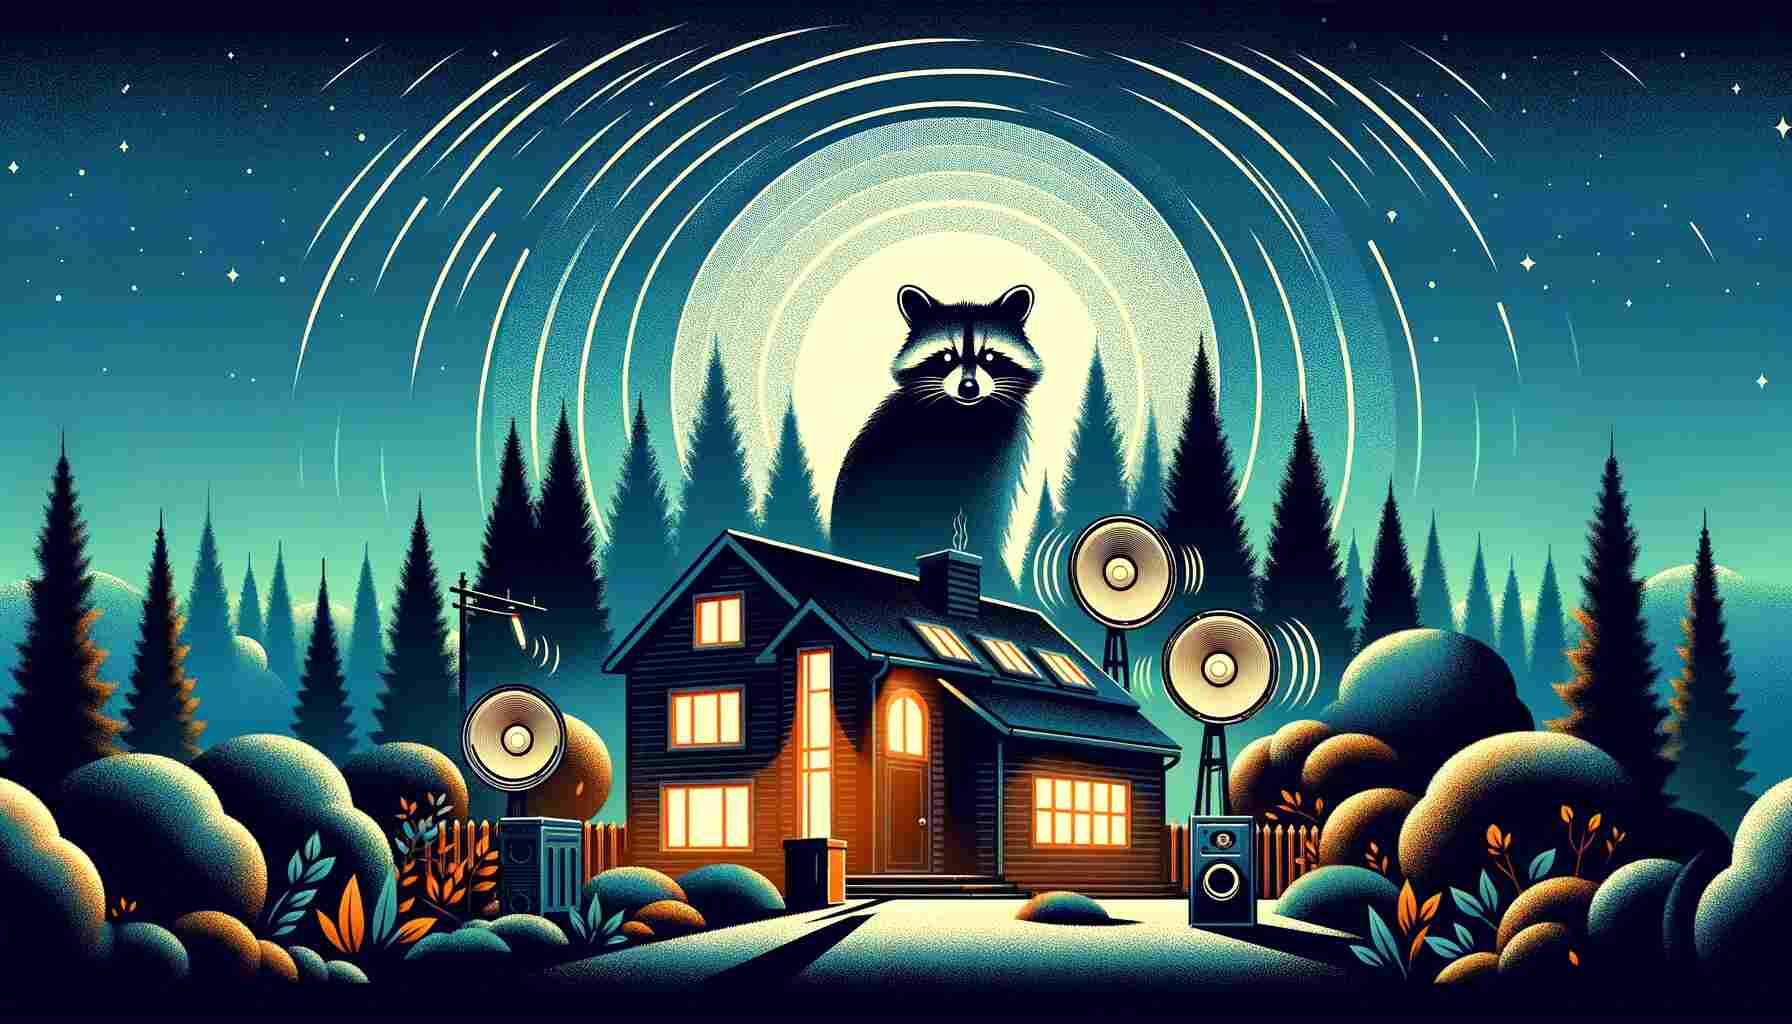 An informative featured image showcasing a comprehensive guide on using sounds to scare raccoons away, depicting speakers set in a natural outdoor environment under a night sky, with the silhouette of a raccoon in the distance, illustrating the innovative blend of technology and nature for wildlife deterrence.